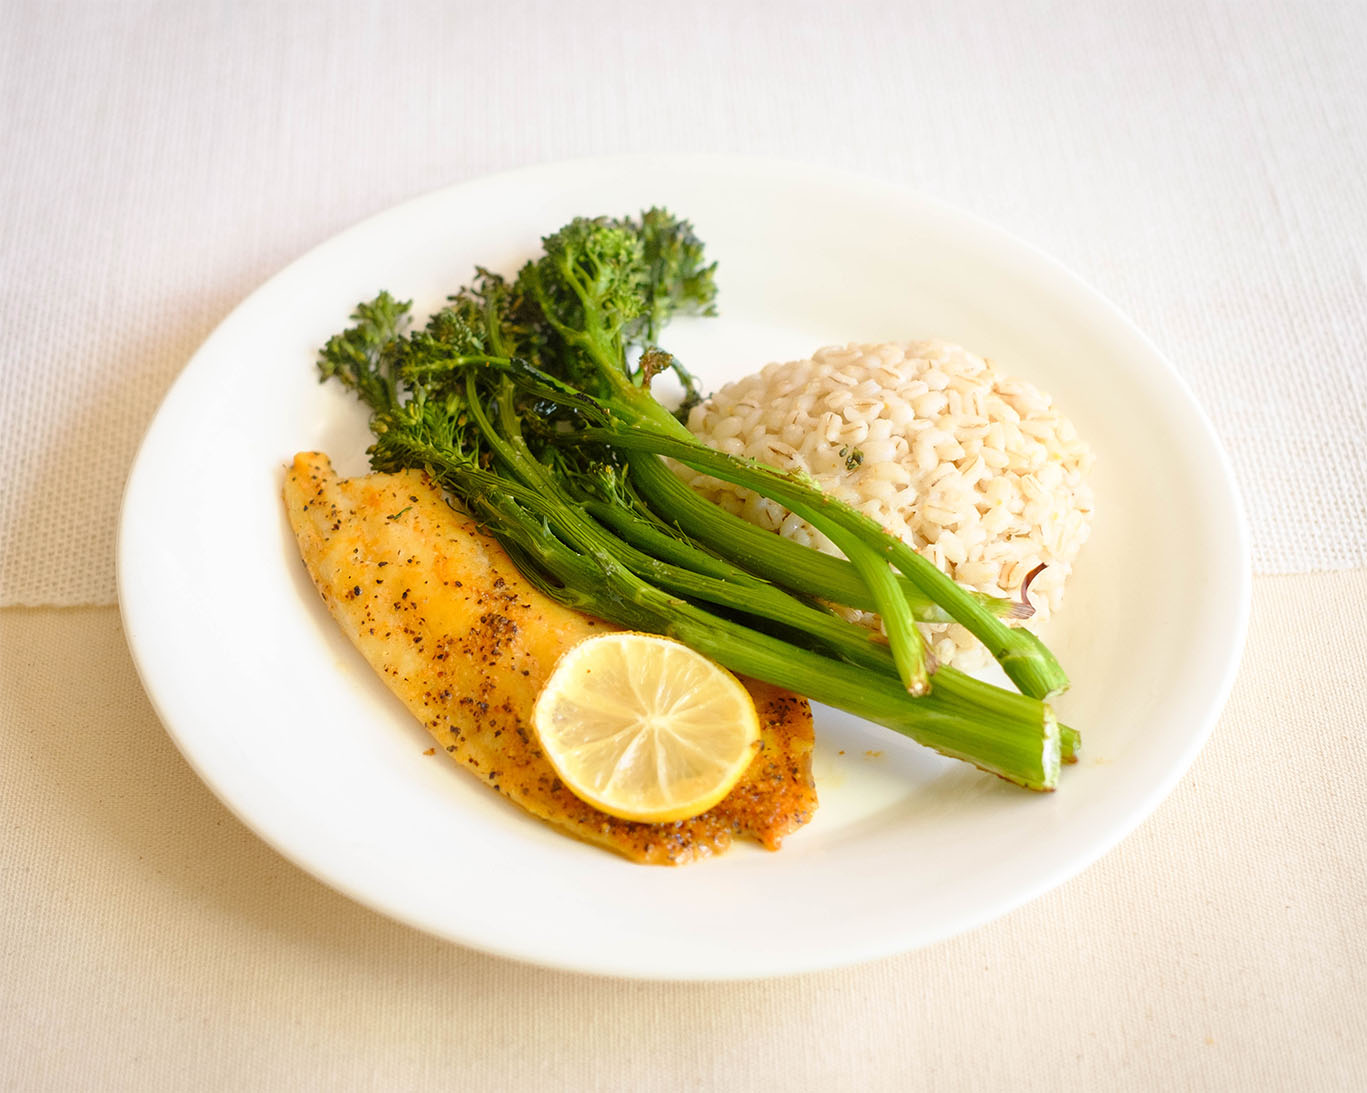 round plate with tilapia fillet, broccolini, and barley